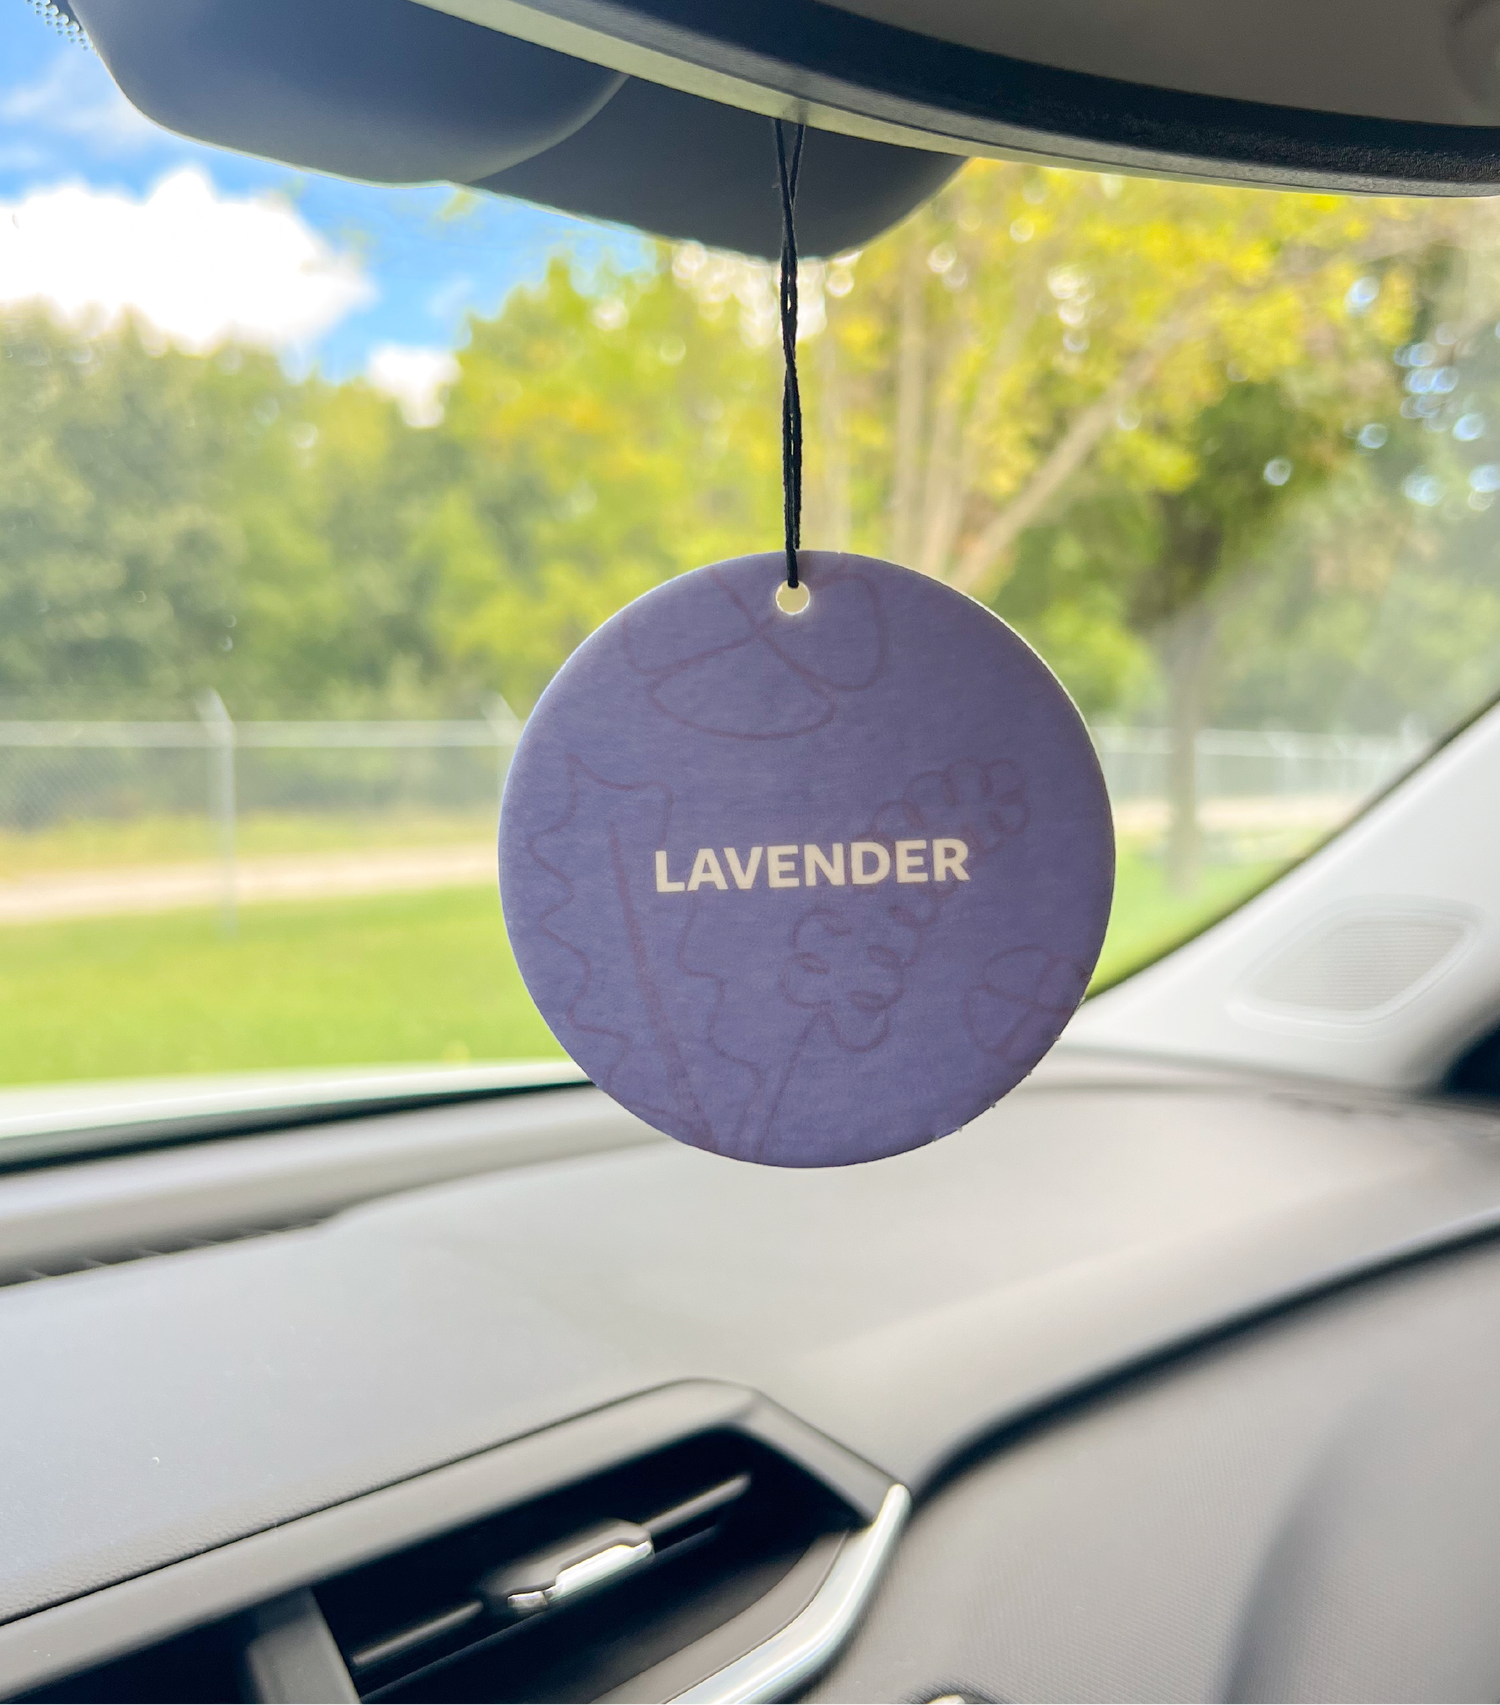 The front of a lavender car freshener hanging in a car.